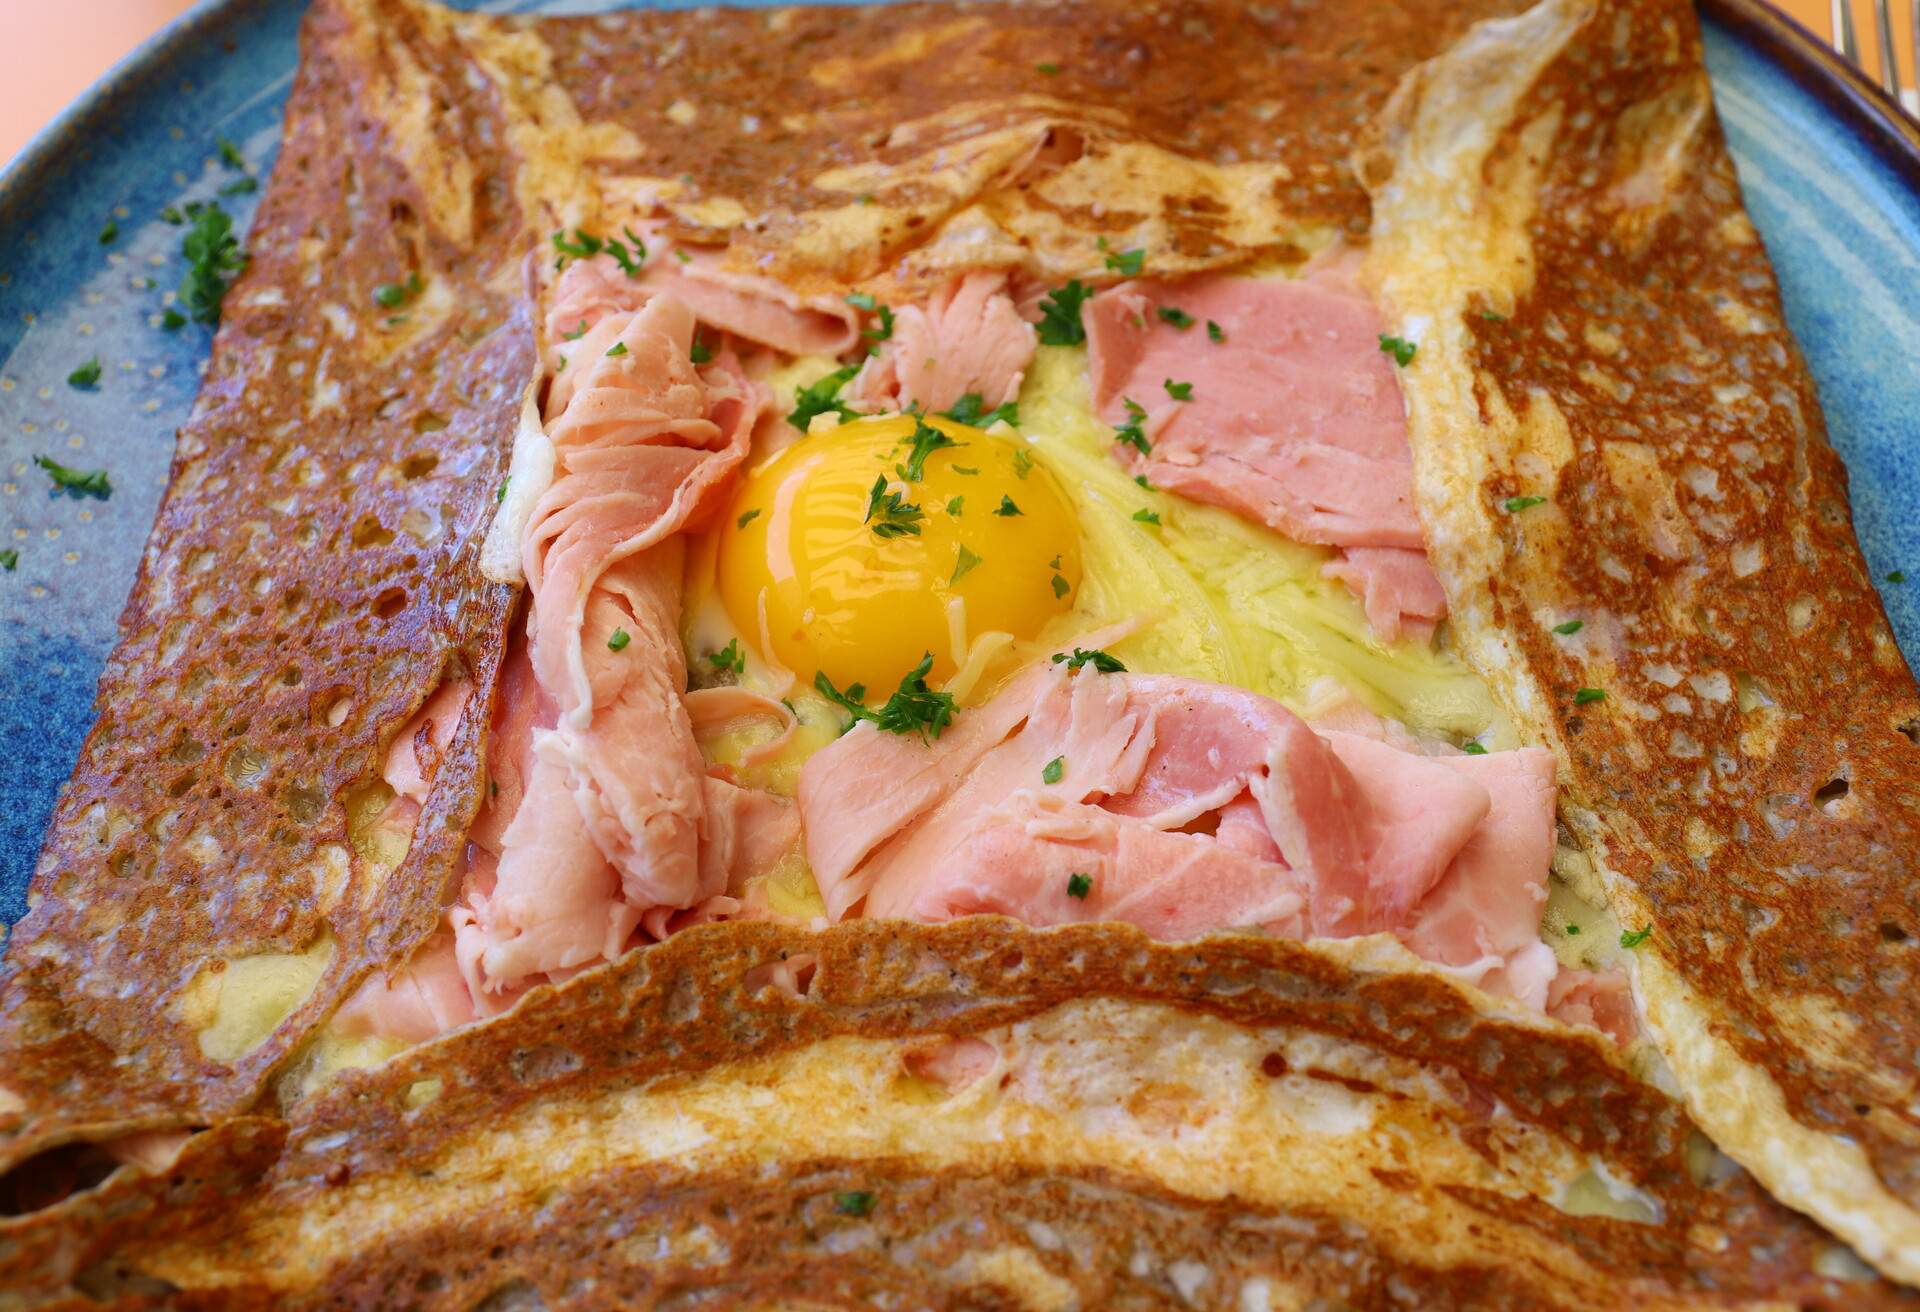 A classic French crêpe filled with ham and cheese, topped by a sunnyside-up egg.